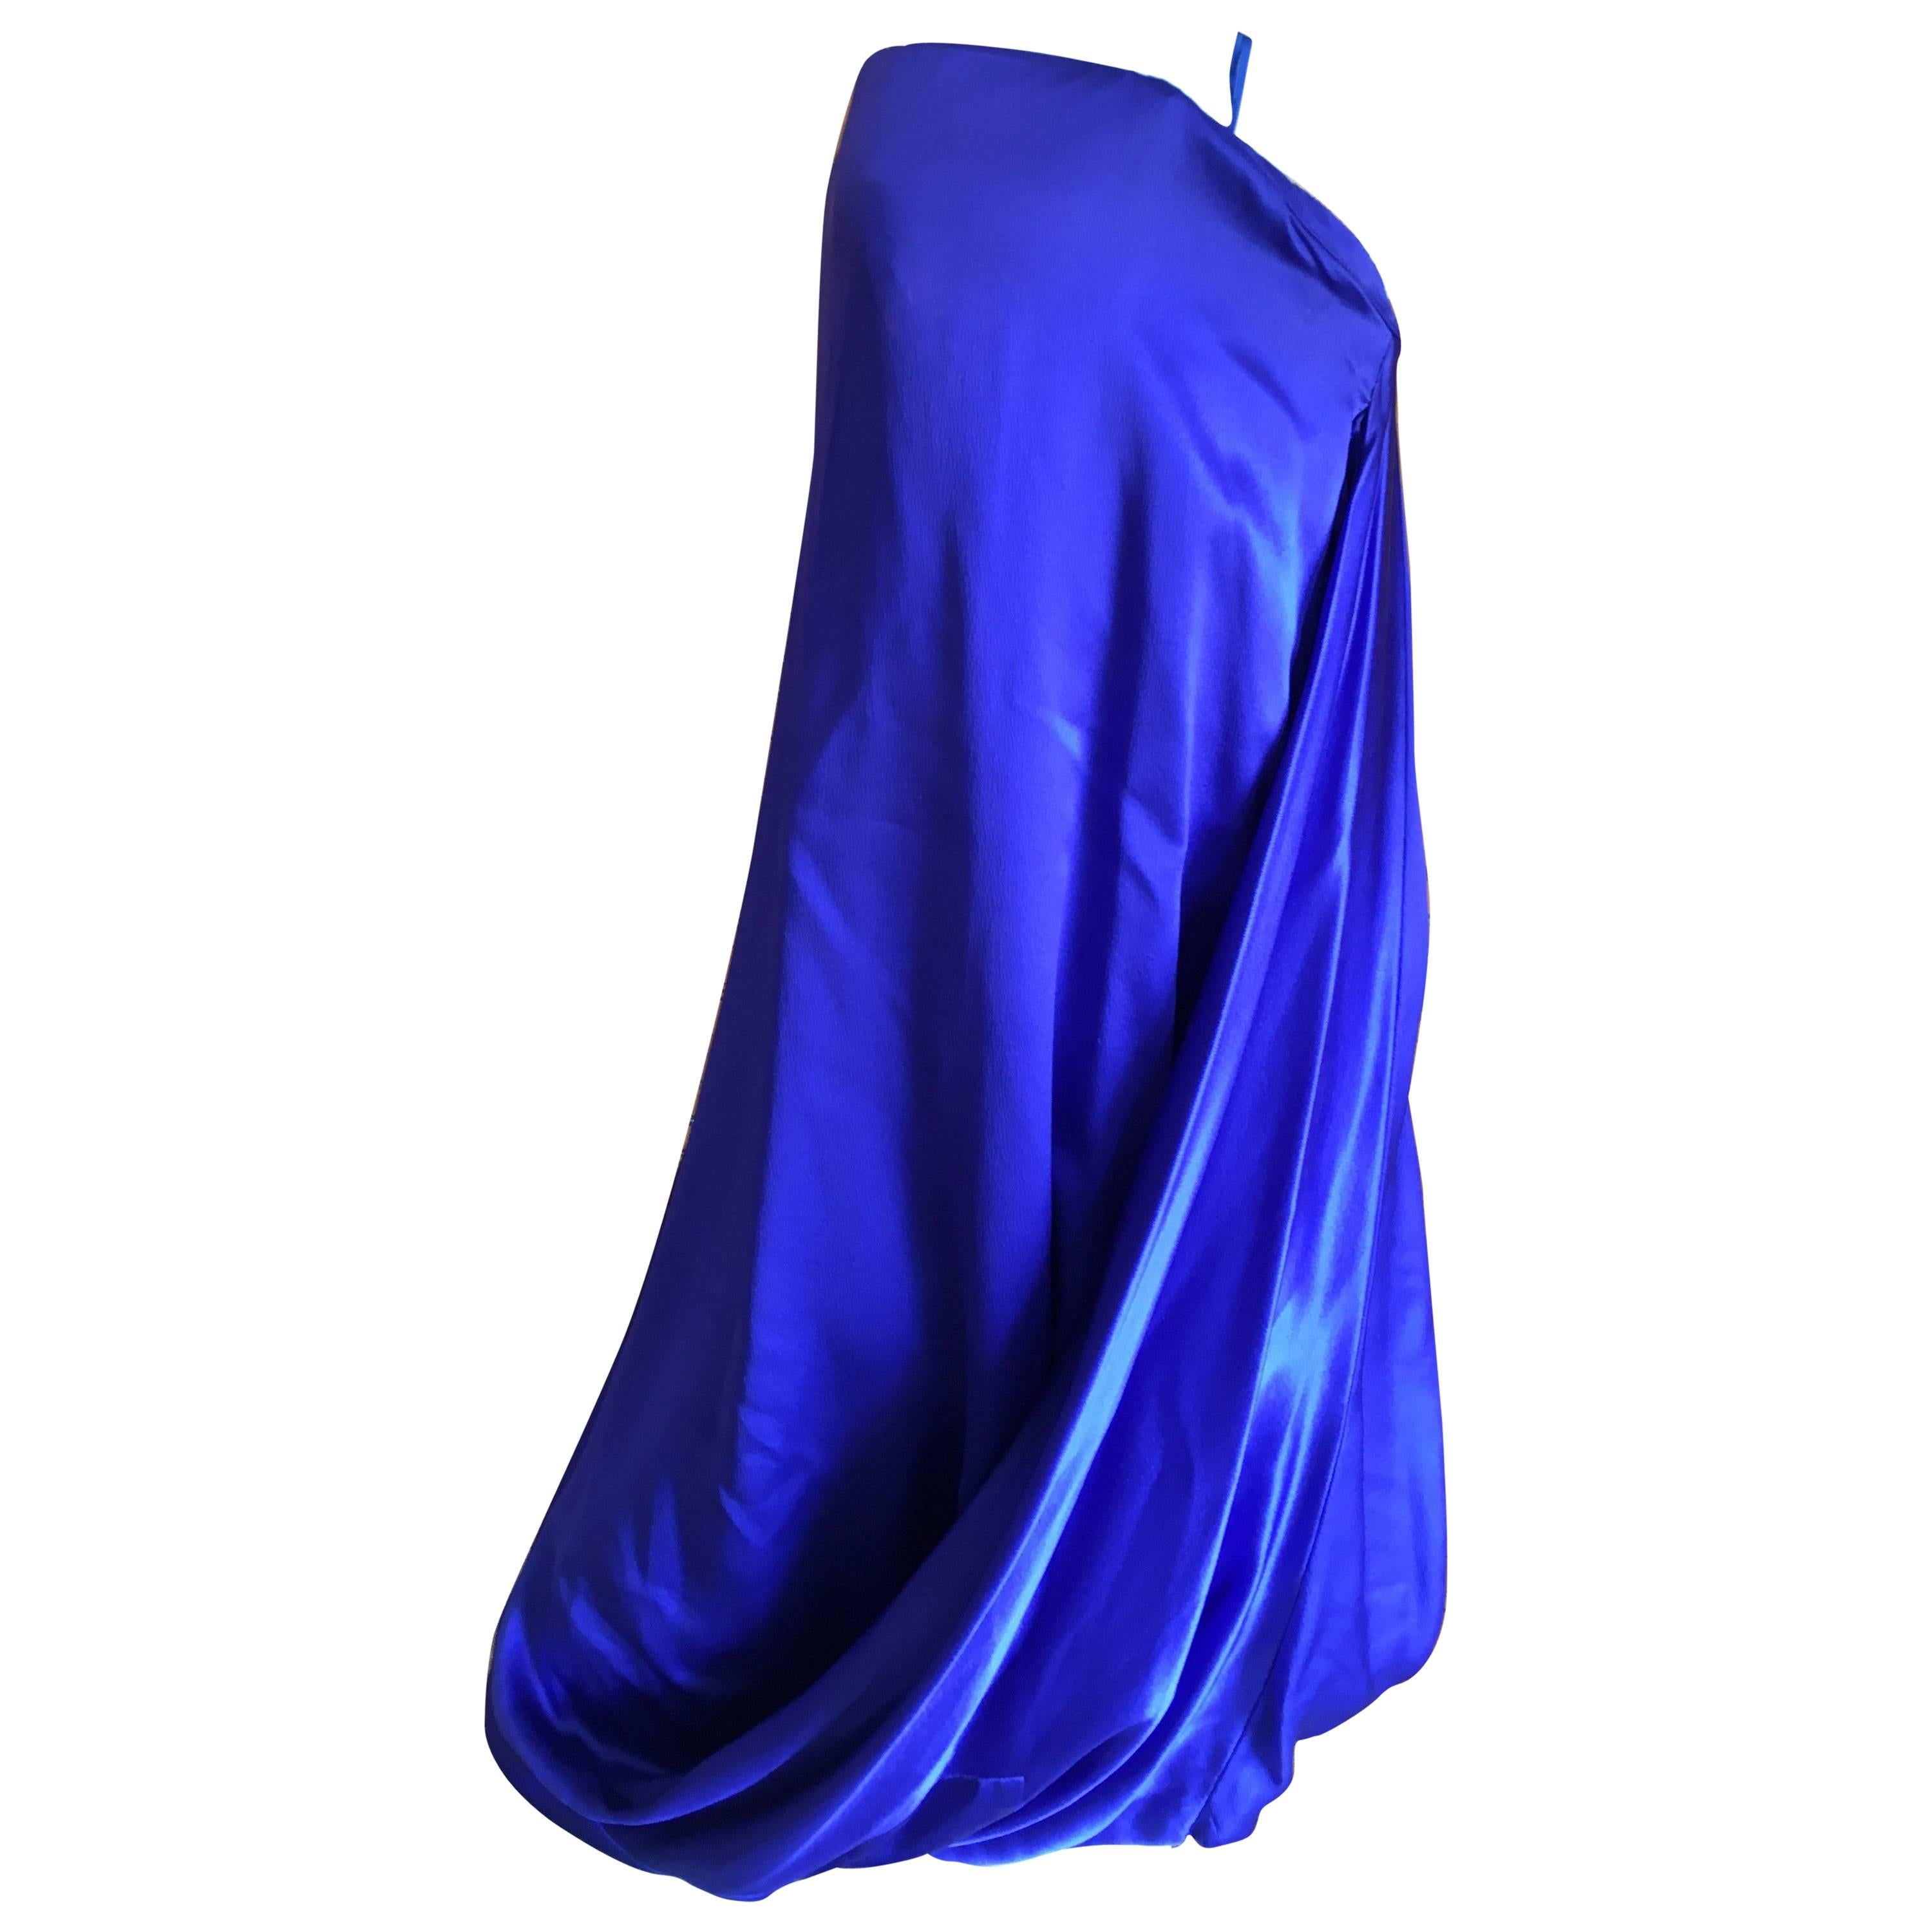 Alexander McQueen 2009 Royal Blue Draped Strapless Dress with Inner Corset For Sale